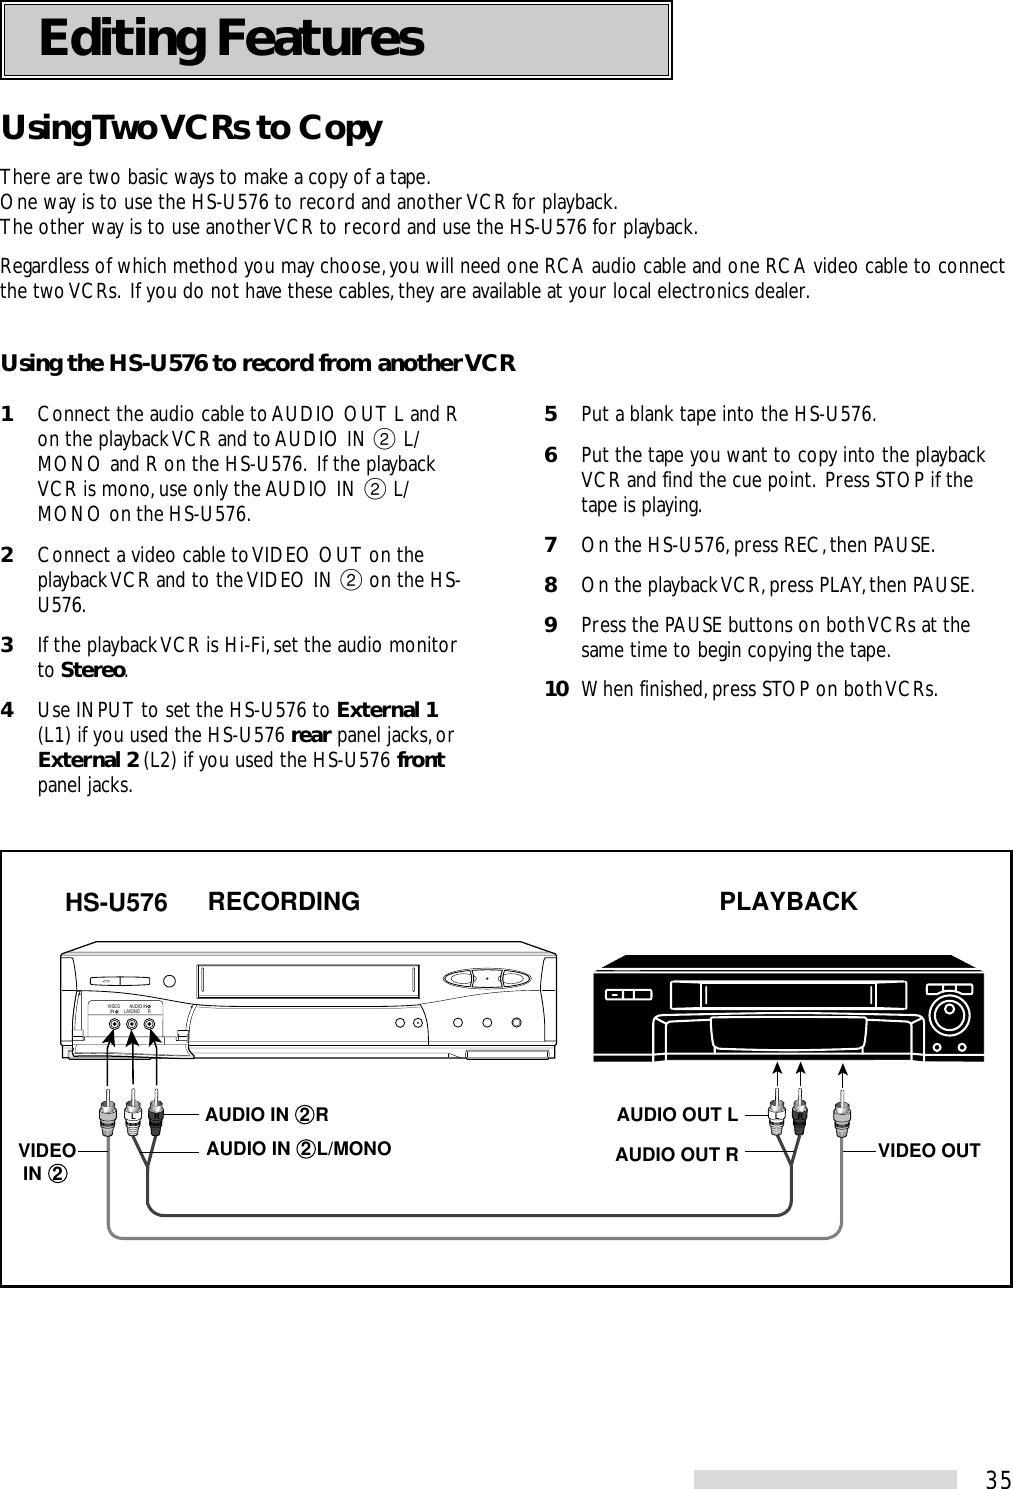 35Editing FeaturesUsing Two VCRs to CopyThere are two basic ways to make a copy of a tape.One way is to use the HS-U576 to record and another VCR for playback.The other way is to use another VCR to record and use the HS-U576 for playback.Regardless of which method you may choose, you will need one RCA audio cable and one RCA video cable to connectthe two VCRs.  If you do not have these cables, they are available at your local electronics dealer.RVIDEOIN    L/MONOAUDIO INLRLRAUDIO IN  2 RAUDIO IN  2 L/MONO AUDIO OUT LAUDIO OUT R VIDEO OUTVIDEO IN  2 RECORDING PLAYBACKHS-U576Using the HS-U576 to record from another VCR1Connect the audio cable to AUDIO OUT L and Ron the playback VCR and to AUDIO IN ˙ L/MONO and R on the HS-U576.  If the playbackVCR is mono, use only the AUDIO IN ˙ L/MONO on the HS-U576.2Connect a video cable to VIDEO OUT on theplayback VCR and to the VIDEO IN ˙ on the HS-U576.3If the playback VCR is Hi-Fi, set the audio monitorto Stereo.4Use INPUT to set the HS-U576 to External 1(L1) if you used the HS-U576 rear panel jacks, orExternal 2 (L2) if you used the HS-U576 frontpanel jacks.5Put a blank tape into the HS-U576.6Put the tape you want to copy into the playbackVCR and find the cue point.  Press STOP if thetape is playing.7On the HS-U576, press REC, then PAUSE.8On the playback VCR, press PLAY, then PAUSE.9Press the PAUSE buttons on both VCRs at thesame time to begin copying the tape.10 When finished, press STOP on both VCRs.